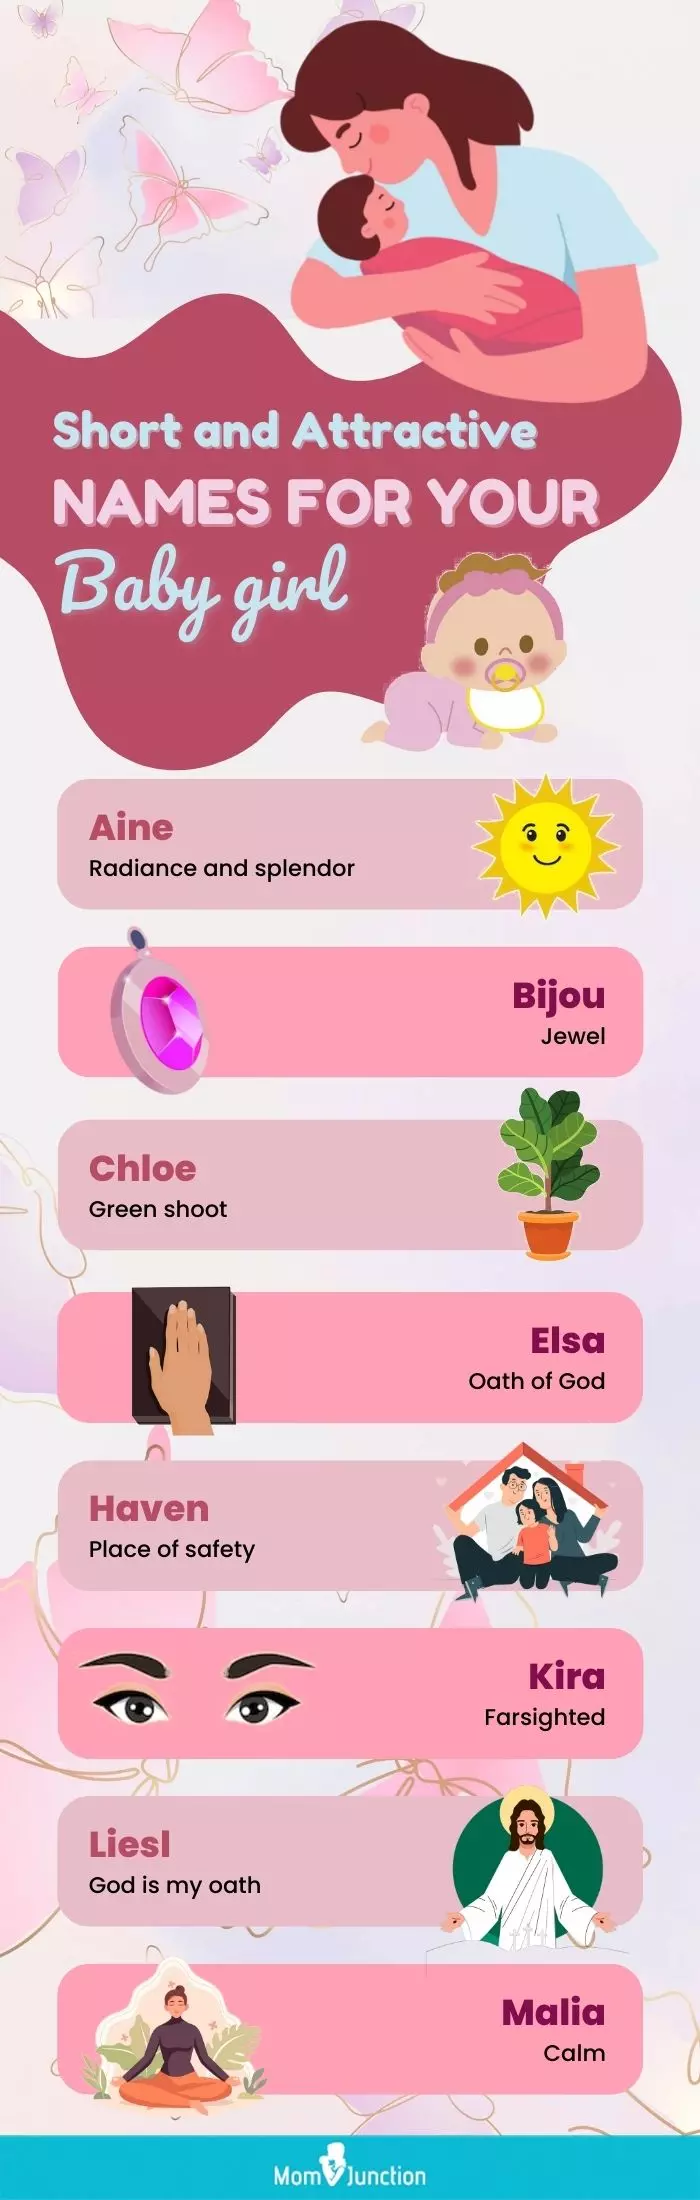 short and attractive names for your baby girl (infographic)